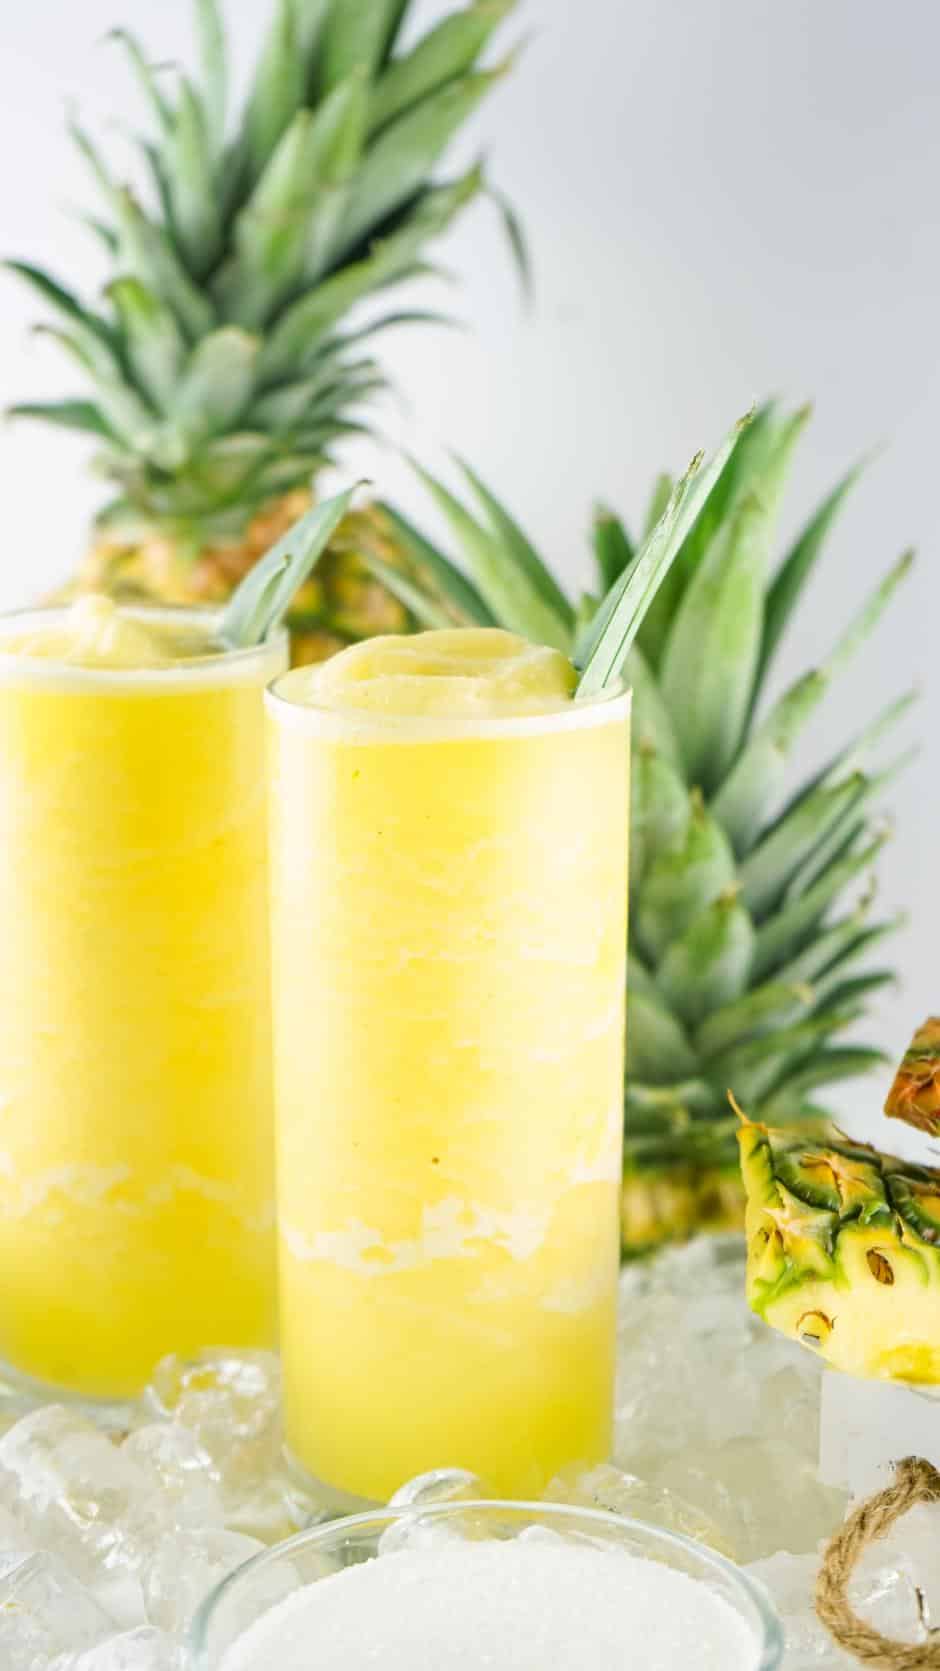 Two tall glasses filled with a frozen pineapple drink and surrounded by ice cubes and pieces of pineapple